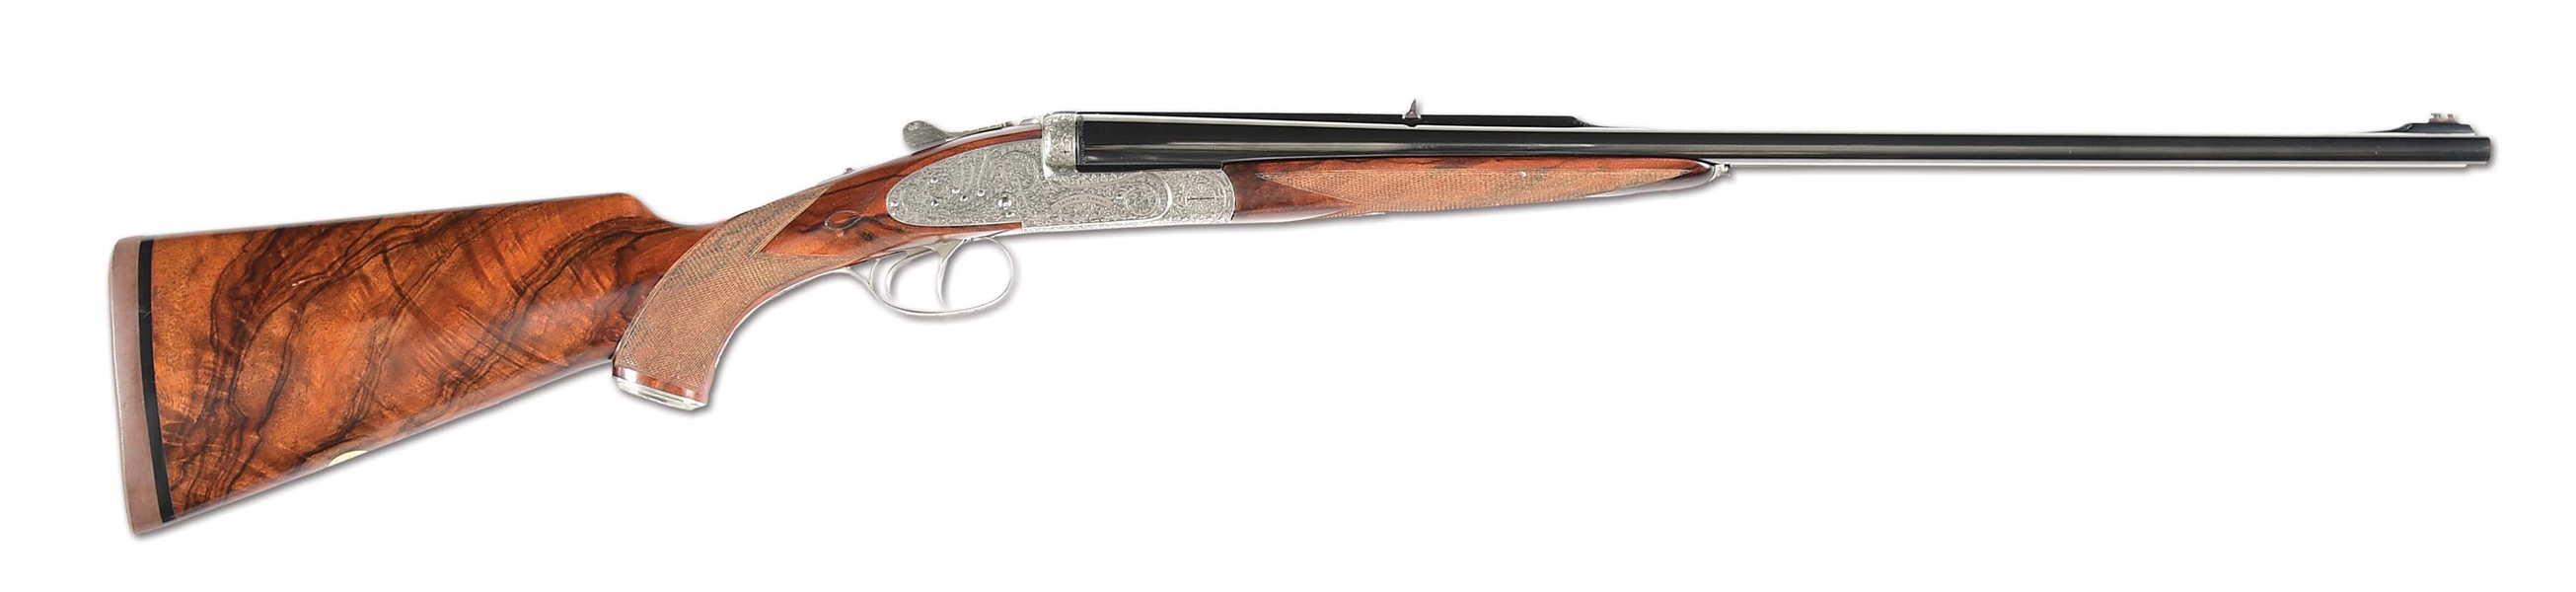 (M) THE VERY FIRST FACTORY ENGRAVED ARMAS GARBI EXPRESS #2 SIDE BY SIDE DOUBLE RIFLE.